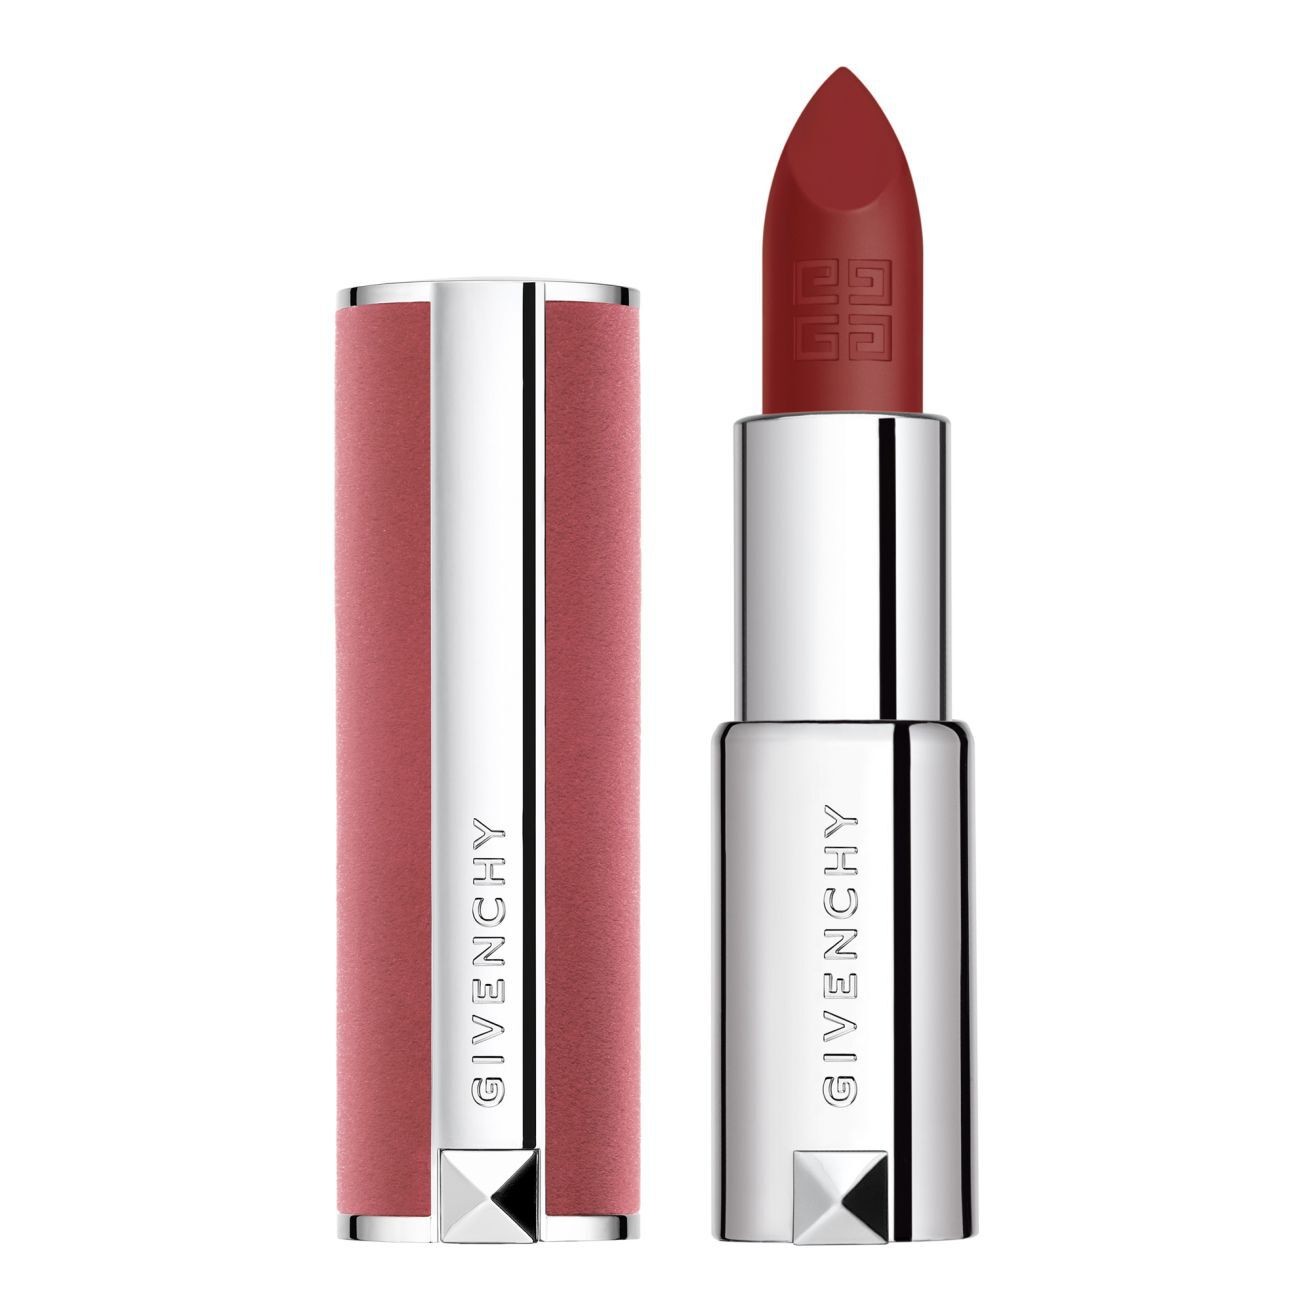 Givenchy Le Rouge Sheer Velvet - N17 Lips | Heathrow Boutique